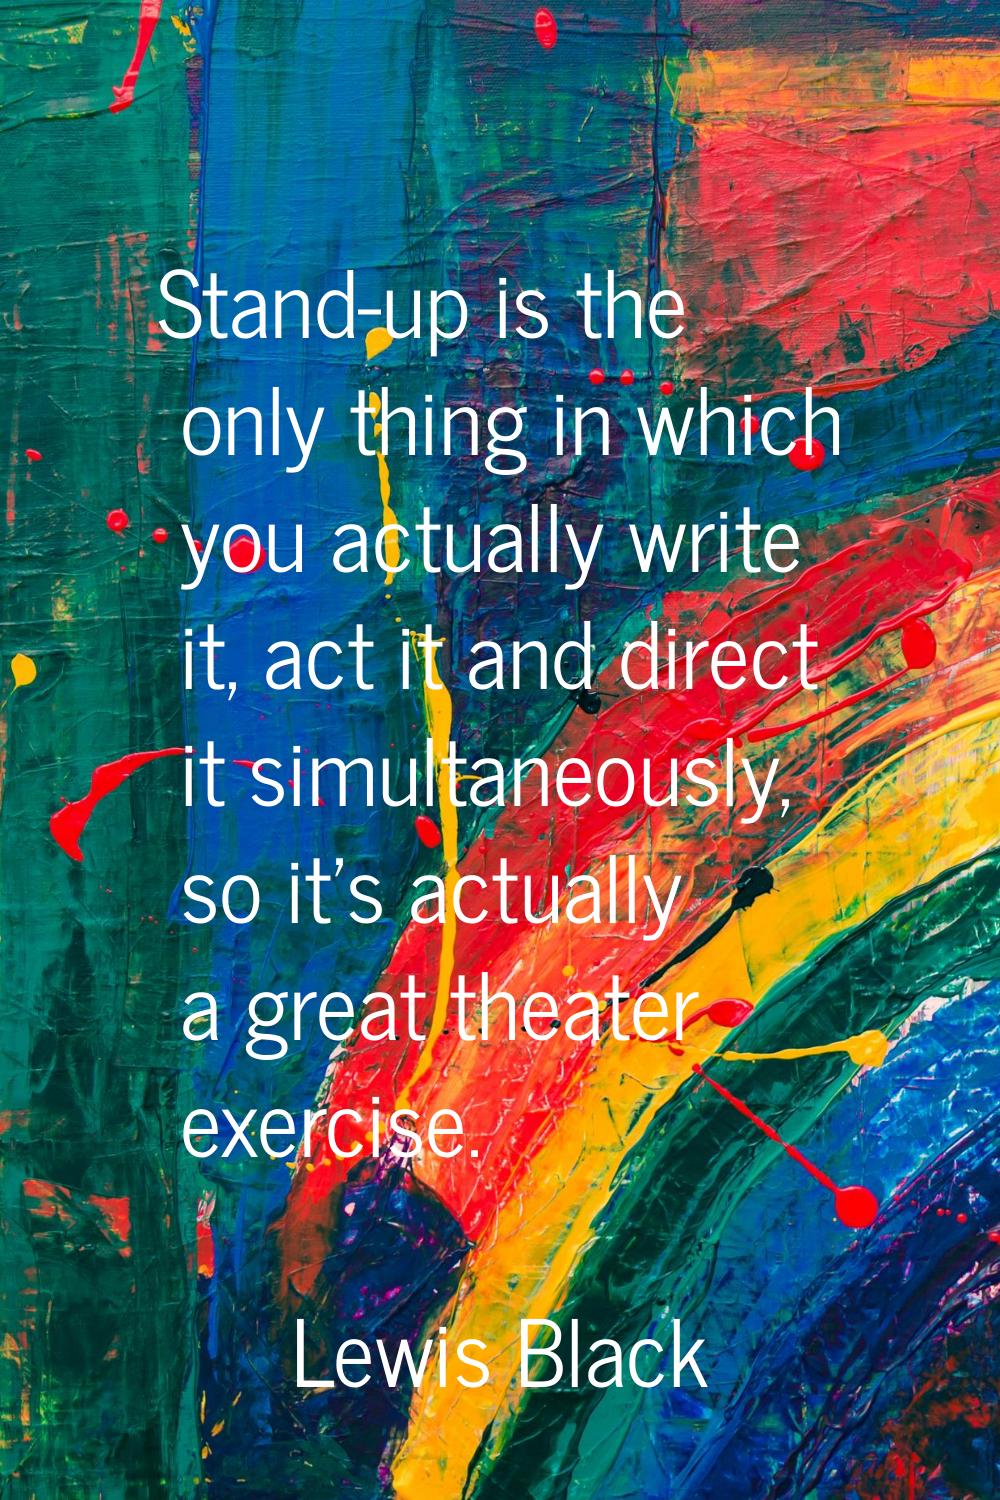 Stand-up is the only thing in which you actually write it, act it and direct it simultaneously, so 